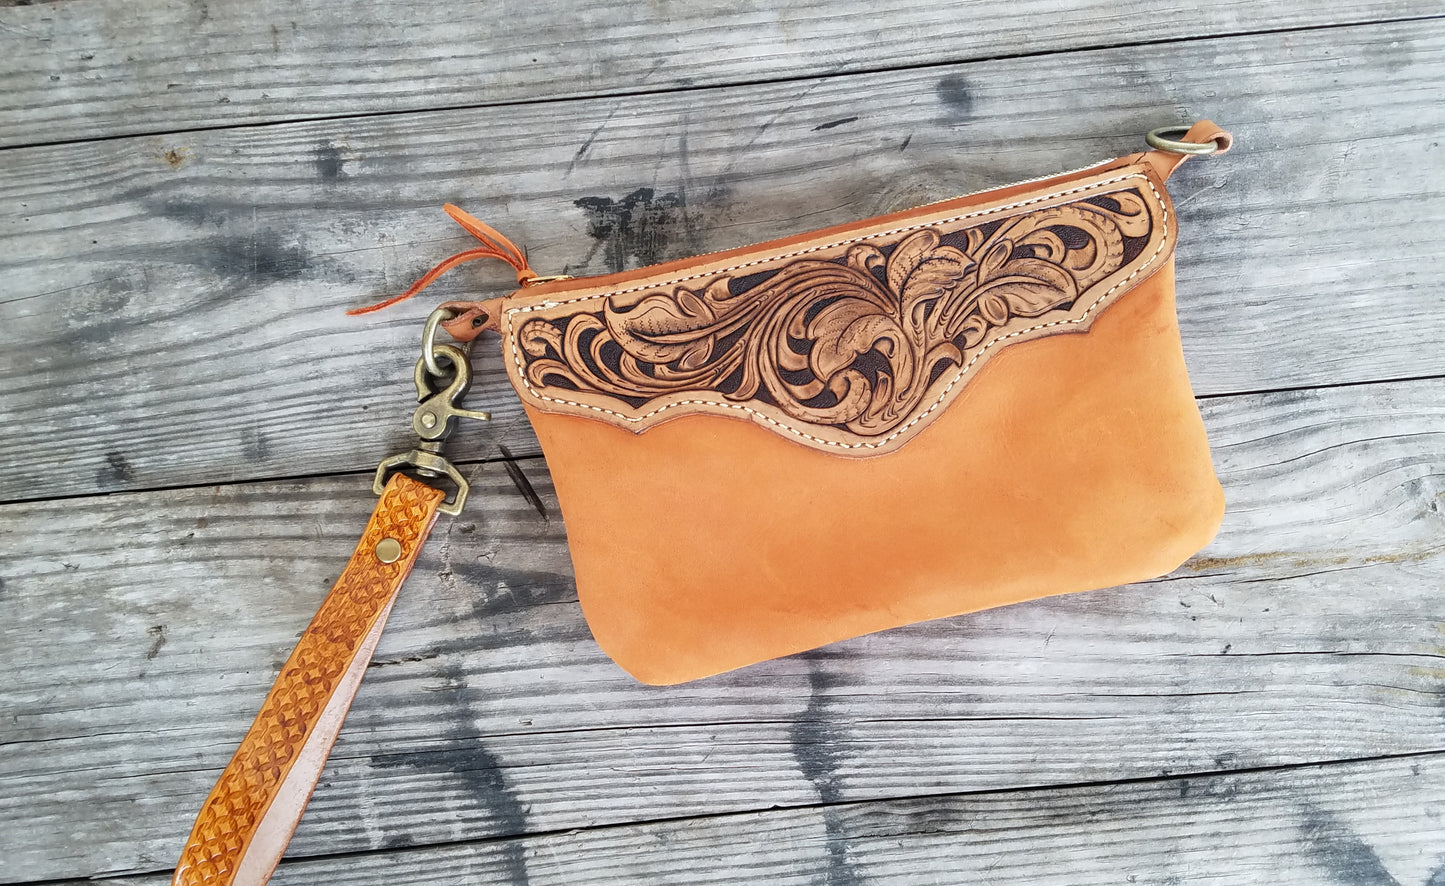 Hand tooled leather wristlet with orange chap leather body